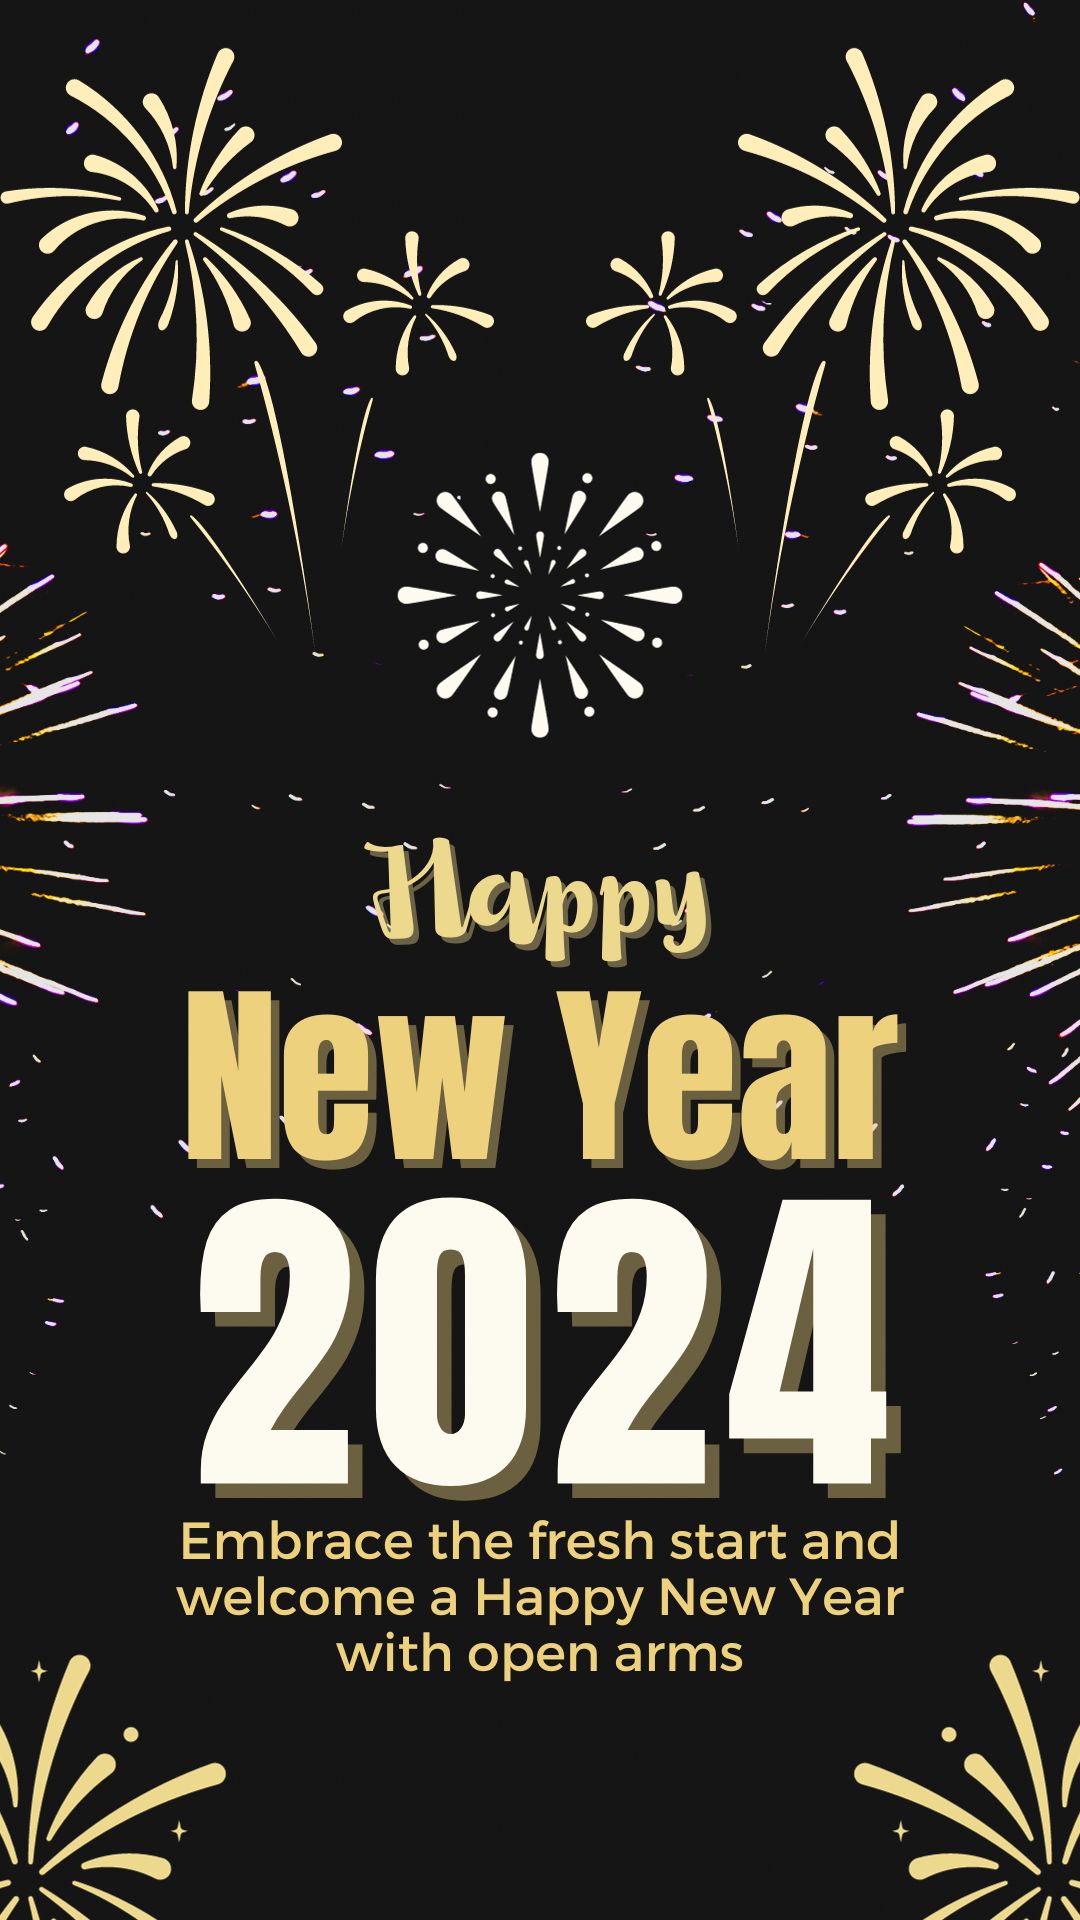 Happy New Year wishes 2024